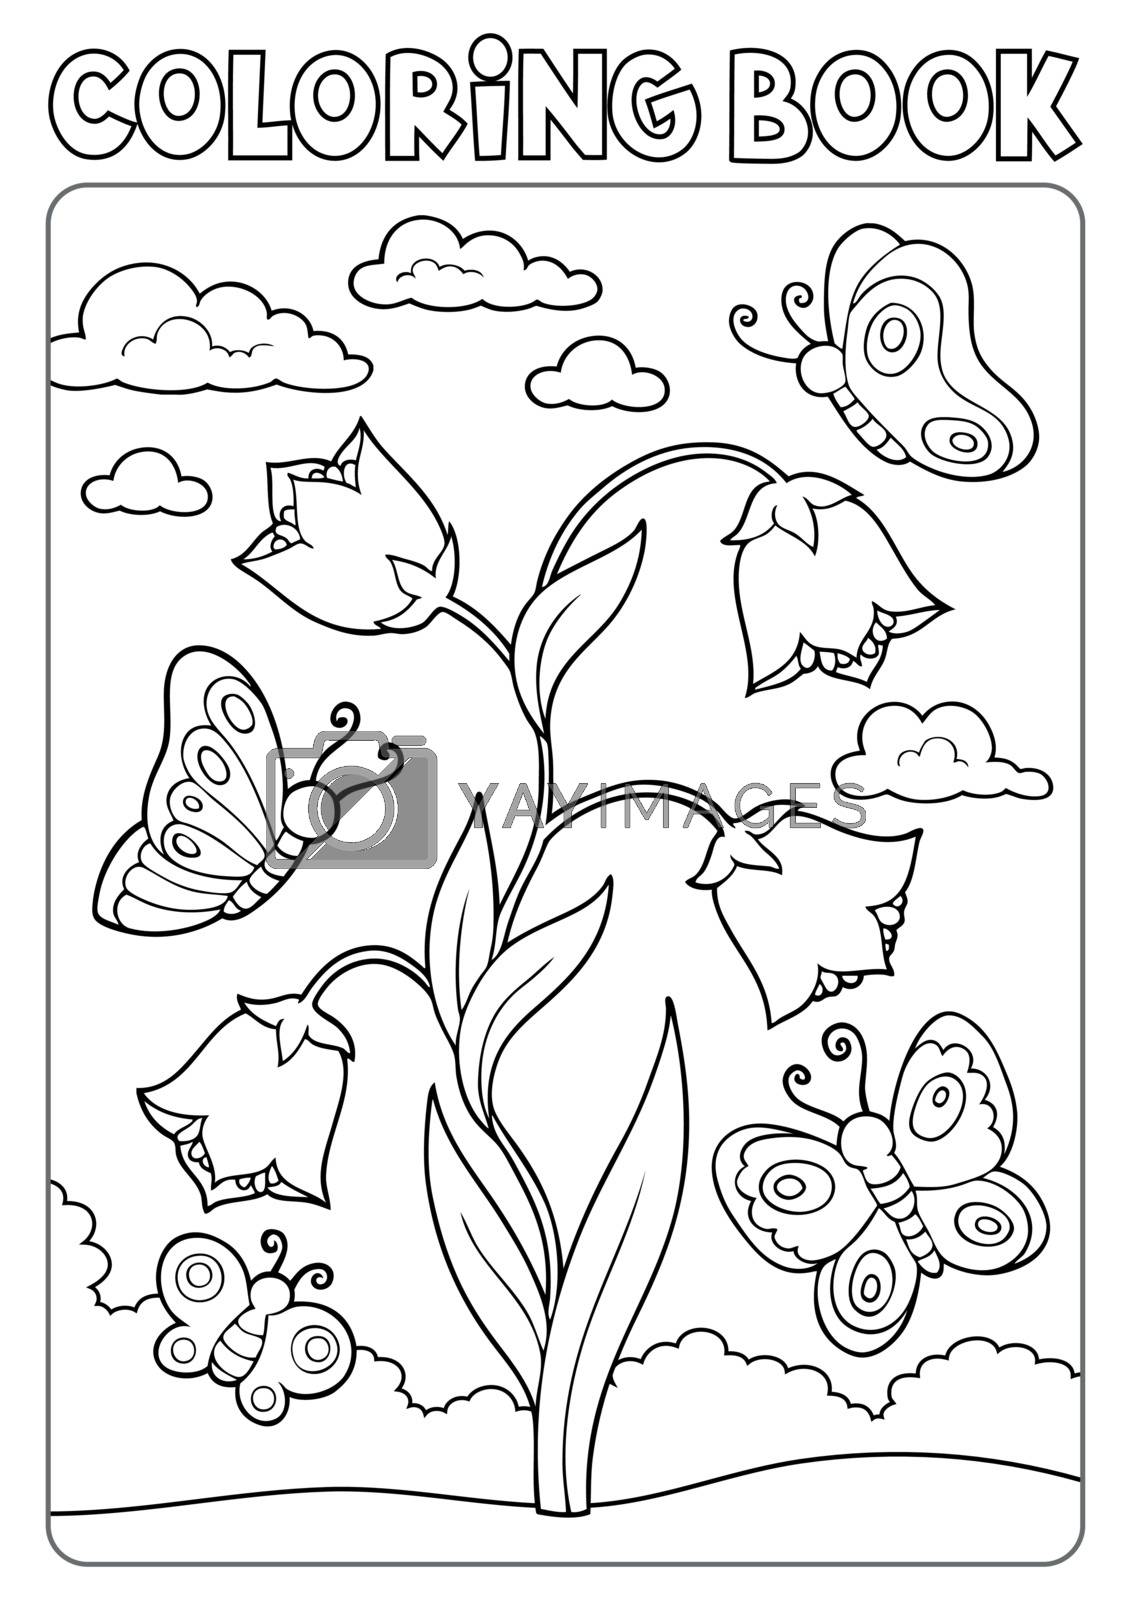 Royalty free image of Coloring book bellflower and butterflies by clairev